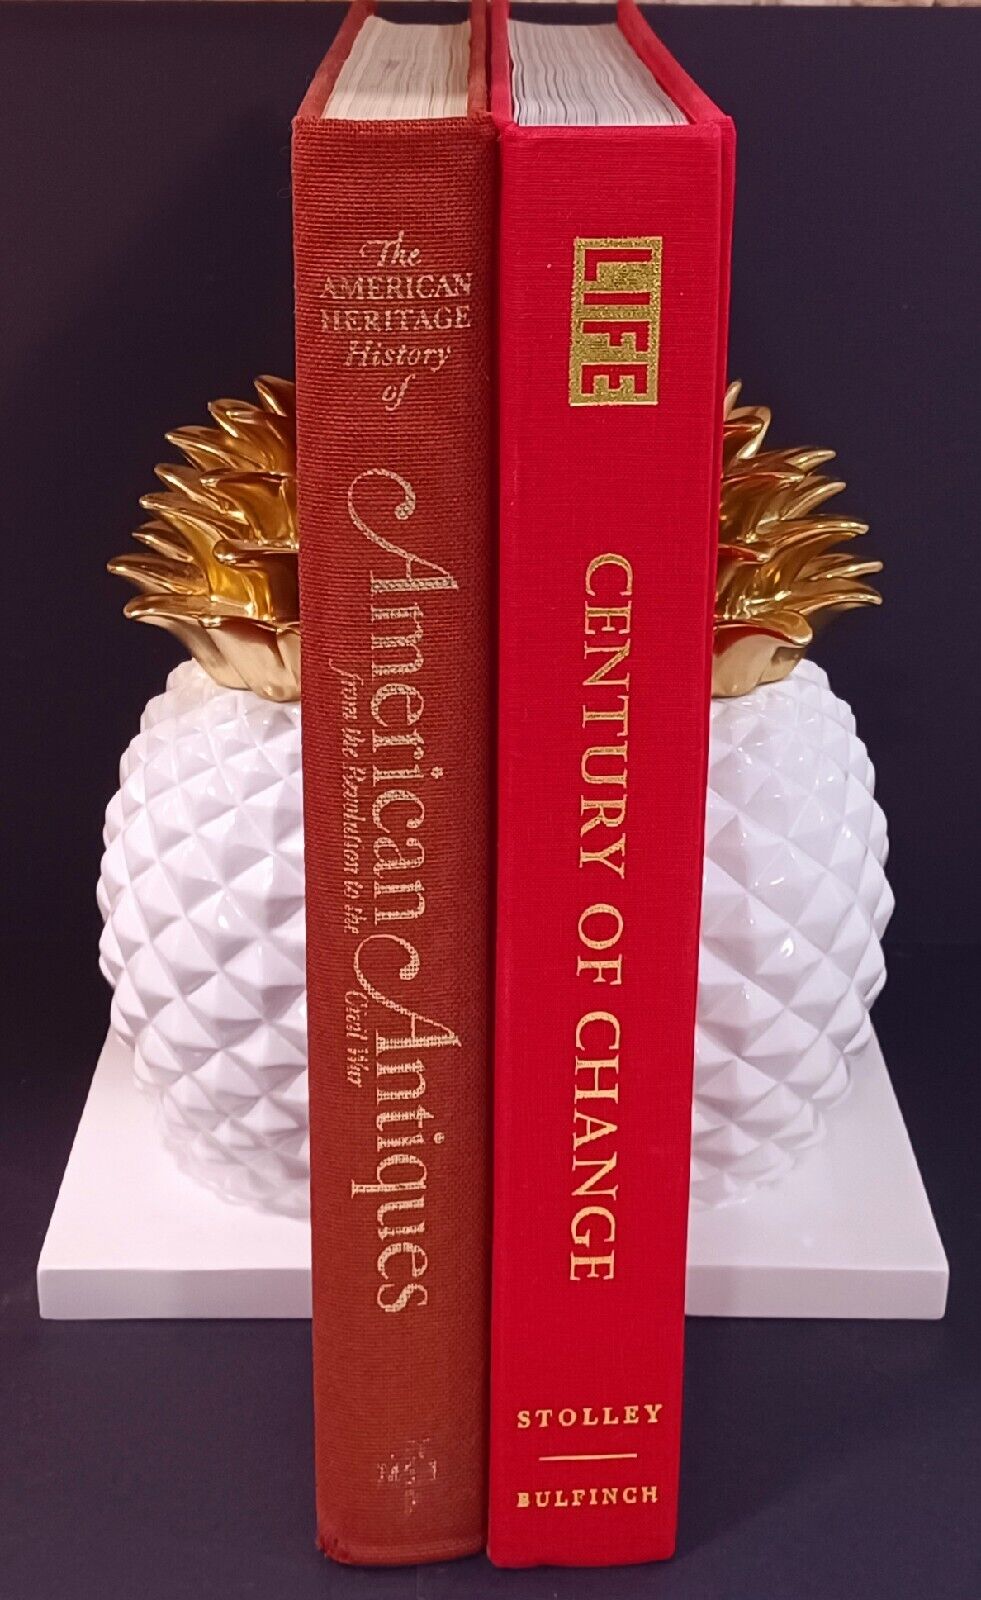 Heavy Enamel Pineapple Bookends White With Gold By Threshold 7 7/8